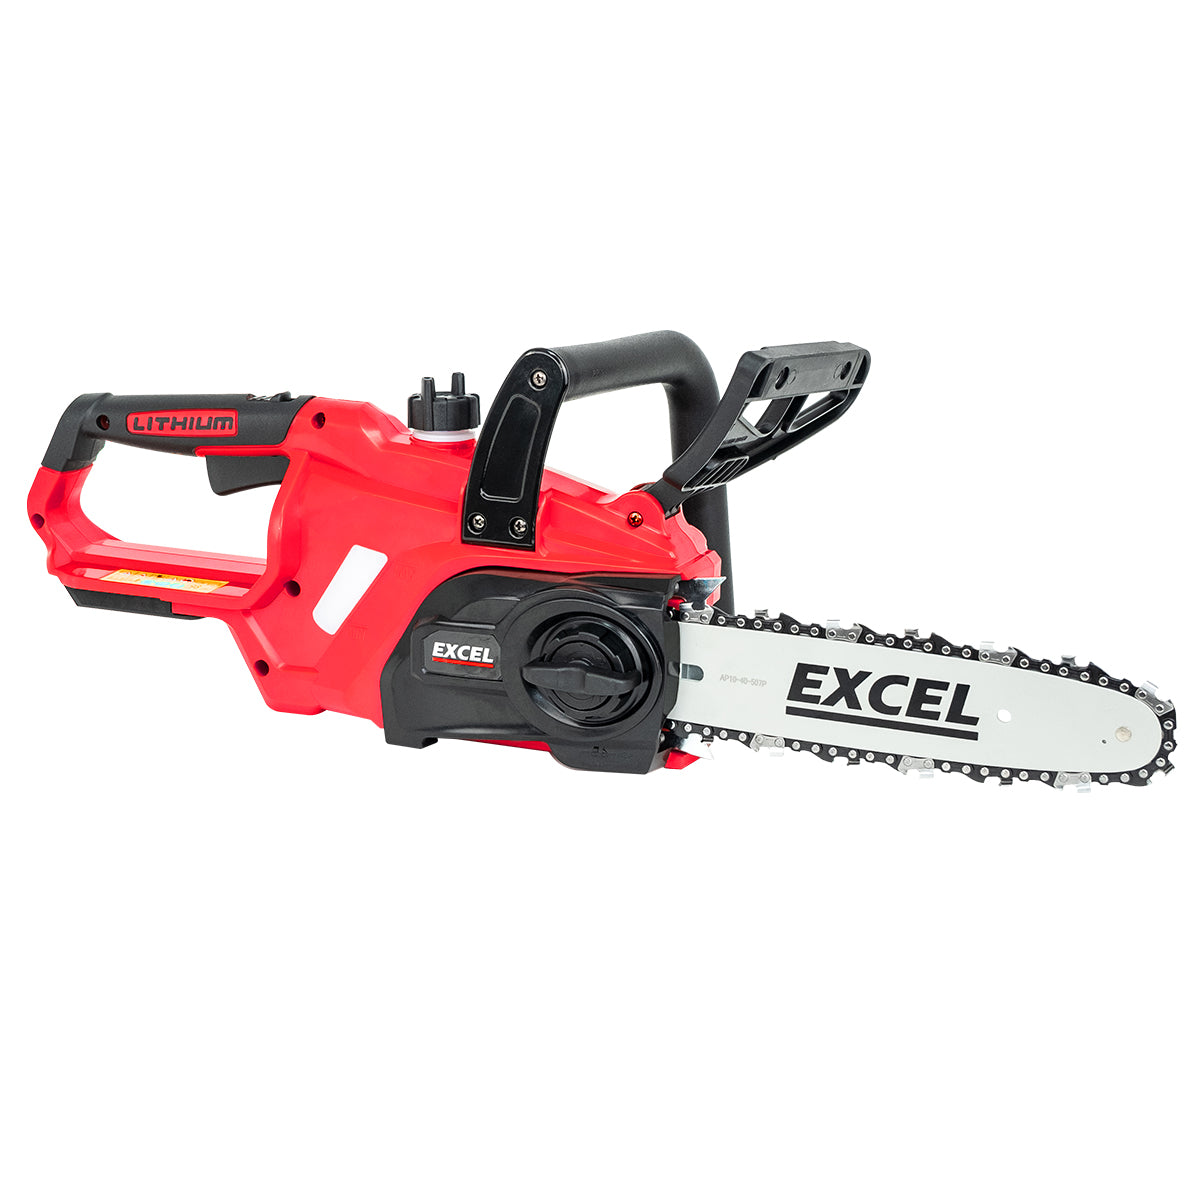 Excel 18V Chainsaw Wood Cutter 245mm with 2 x 5.0Ah Battery & Charger